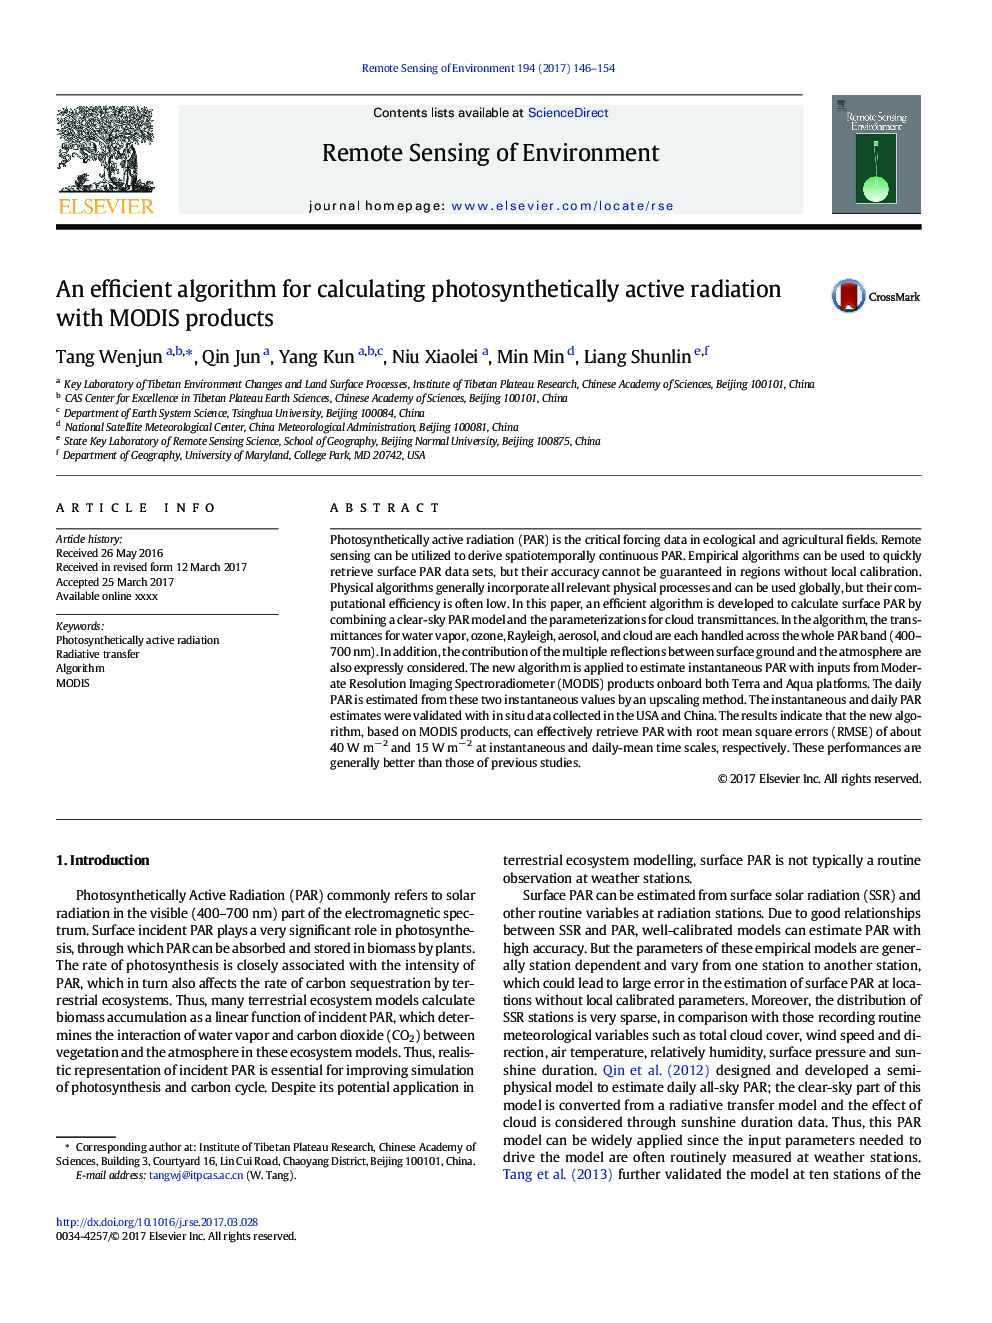 An efficient algorithm for calculating photosynthetically active radiation with MODIS products